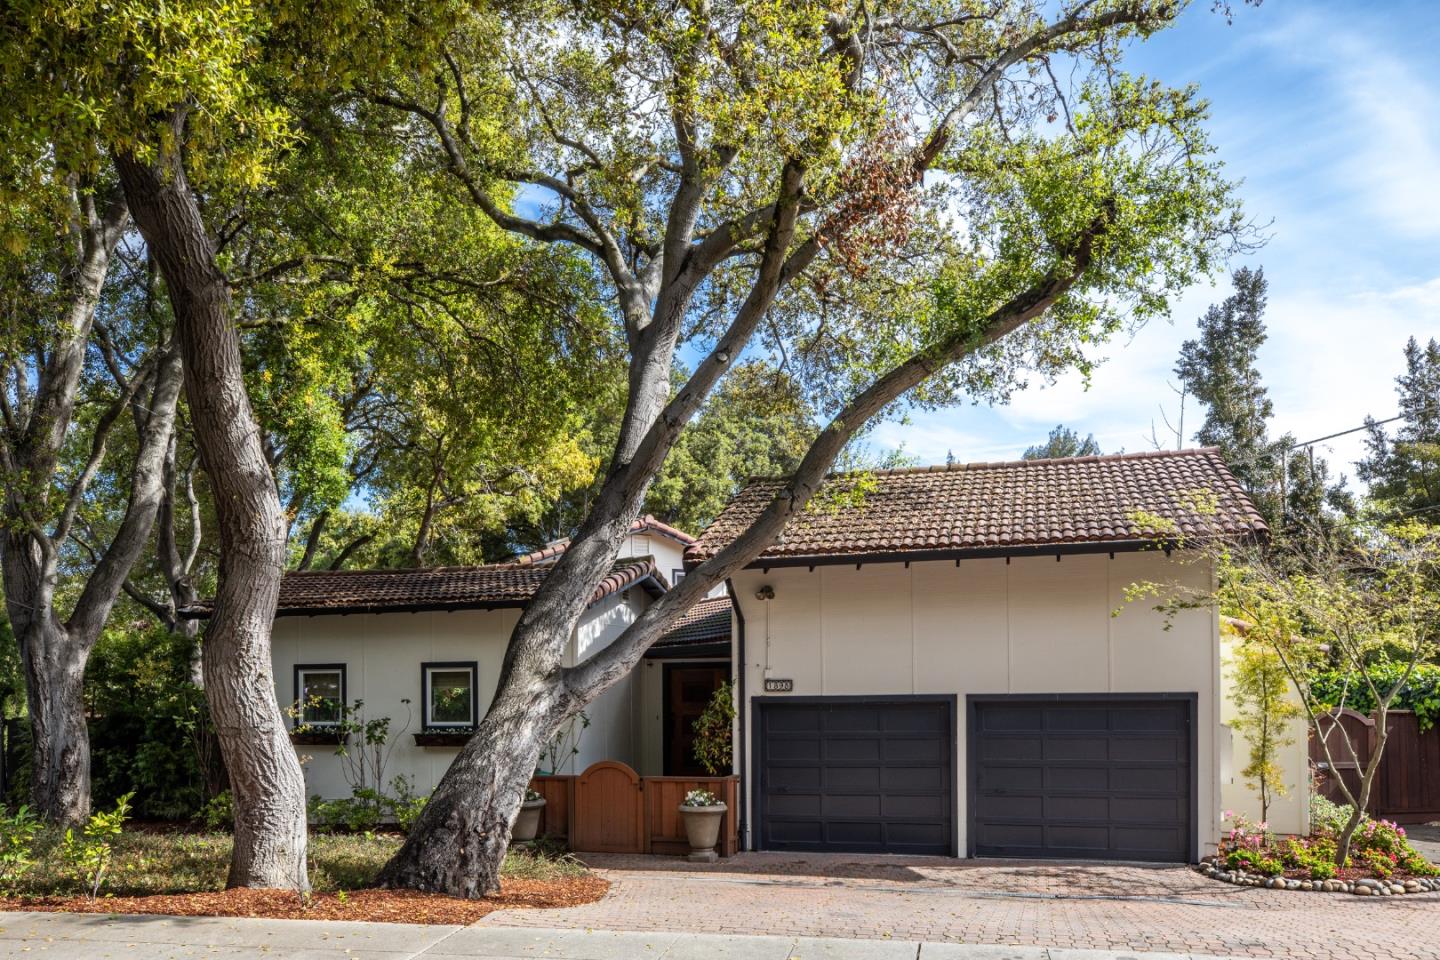 Photo of 1395 Woodland Ave in Menlo Park, CA